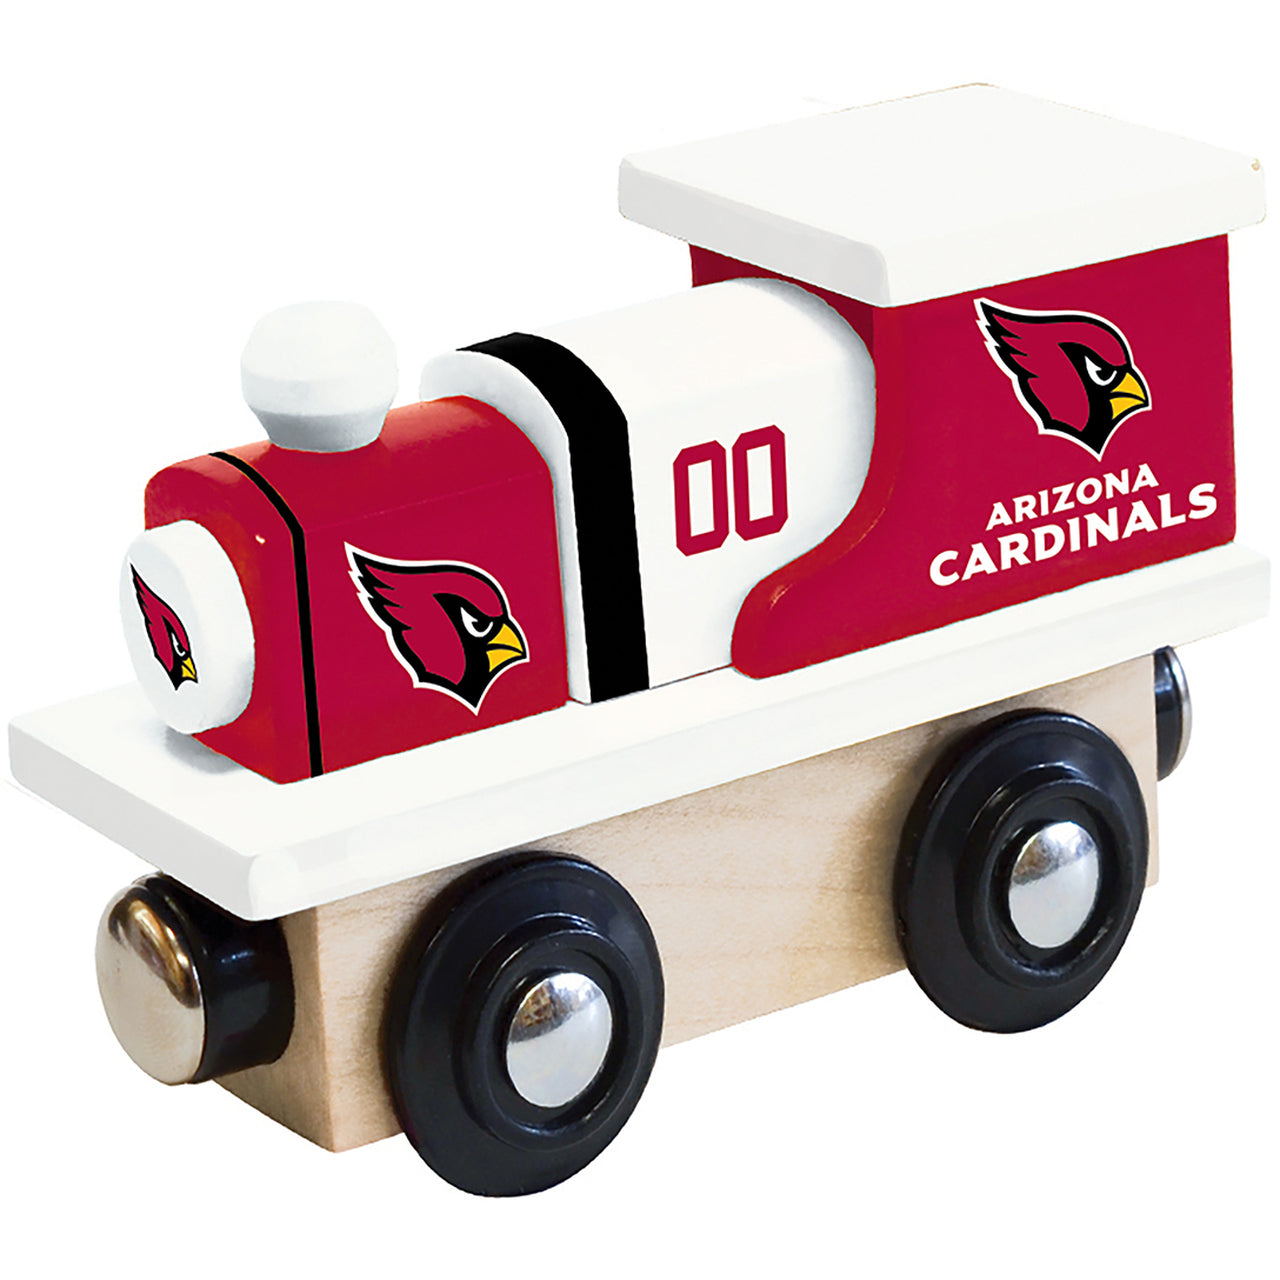 Arizona Cardinals Wooden Toy Train Engine by Masterpieces